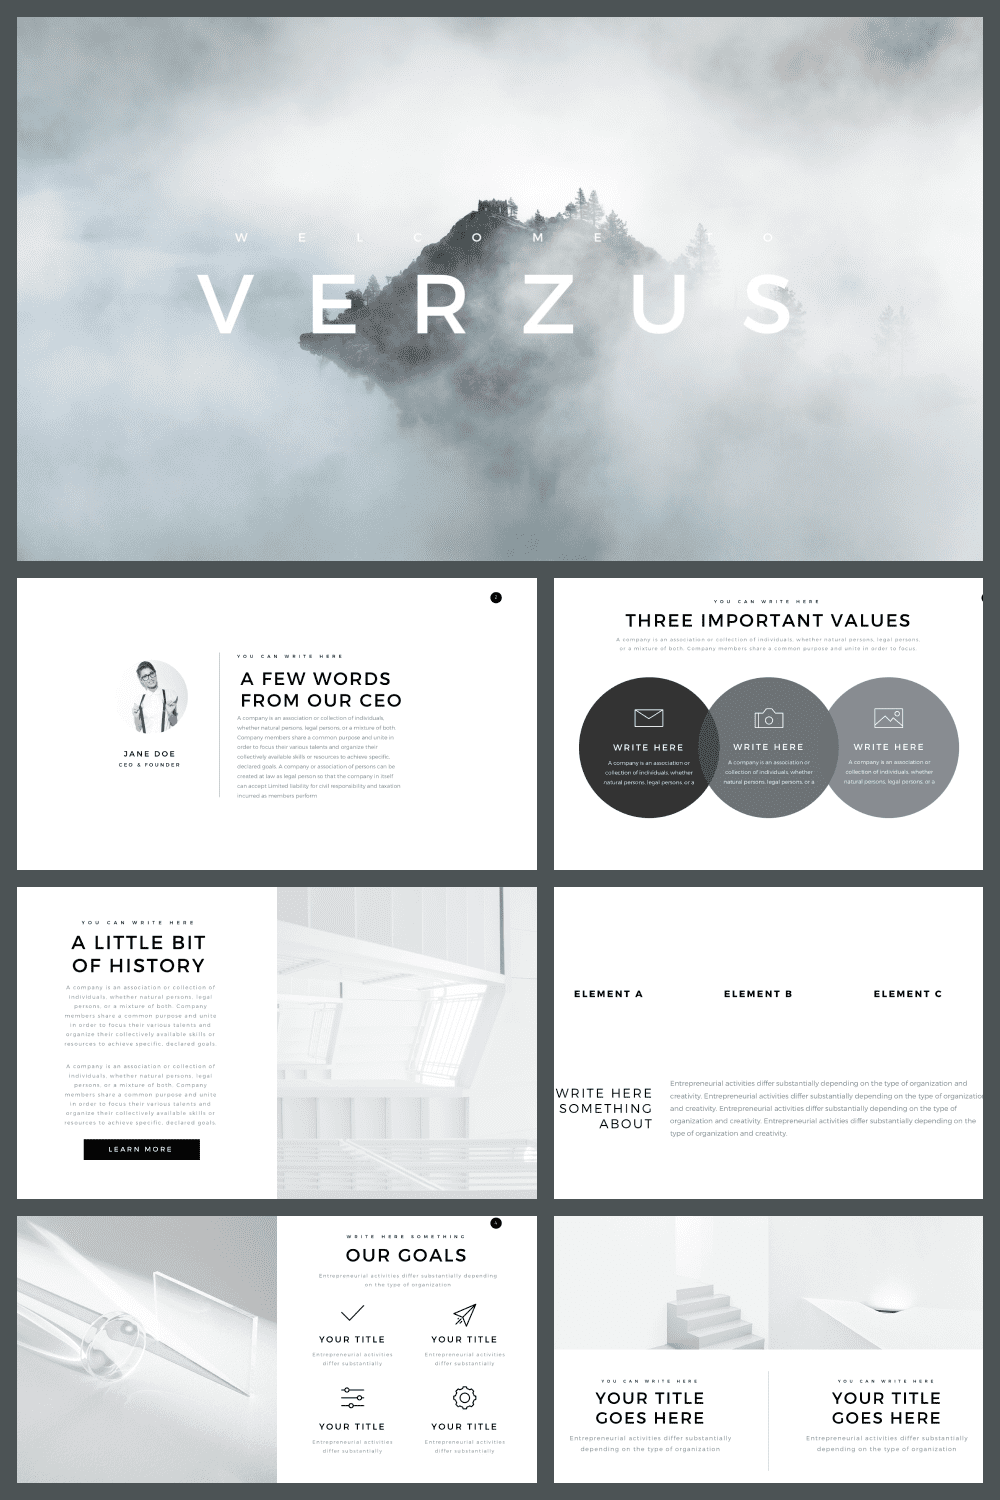 Stylish fresh template in gray colors.